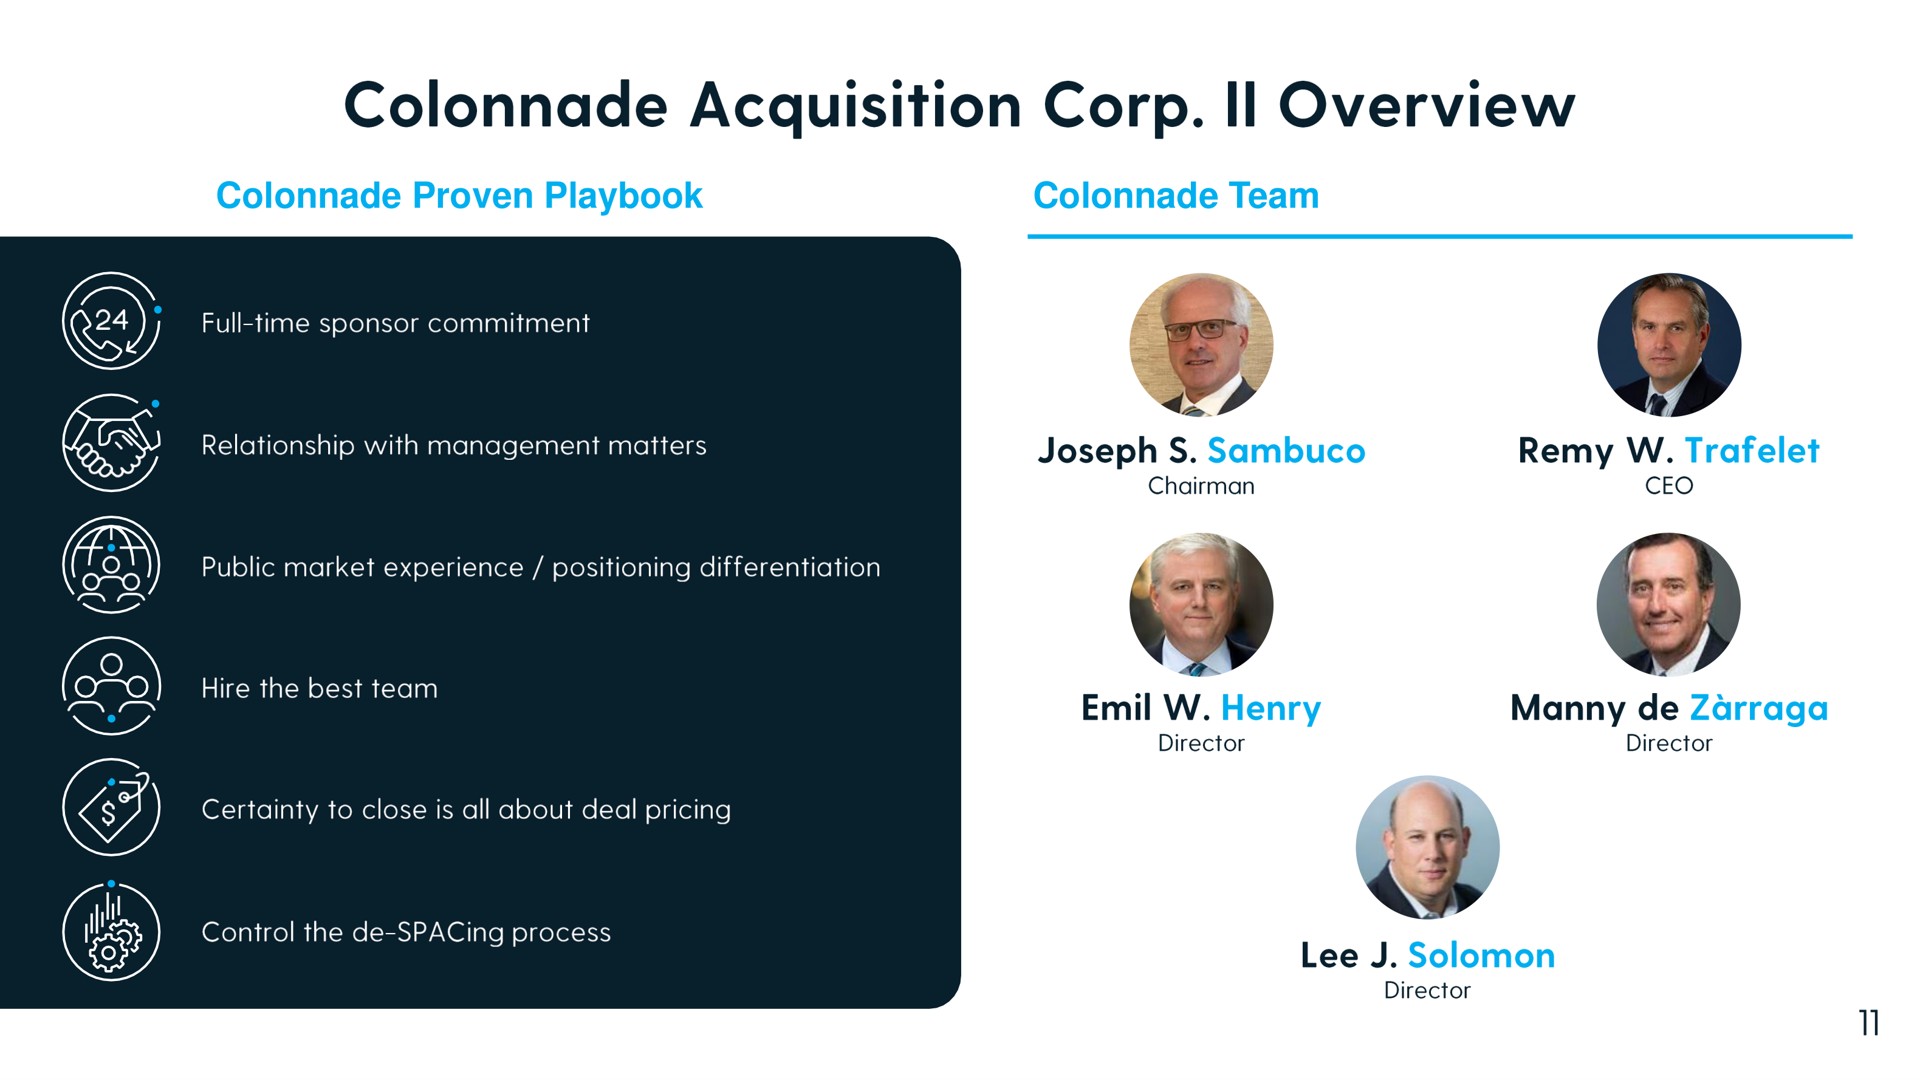 colonnade proven playbook colonnade team acquisition corp overview | Plastiq